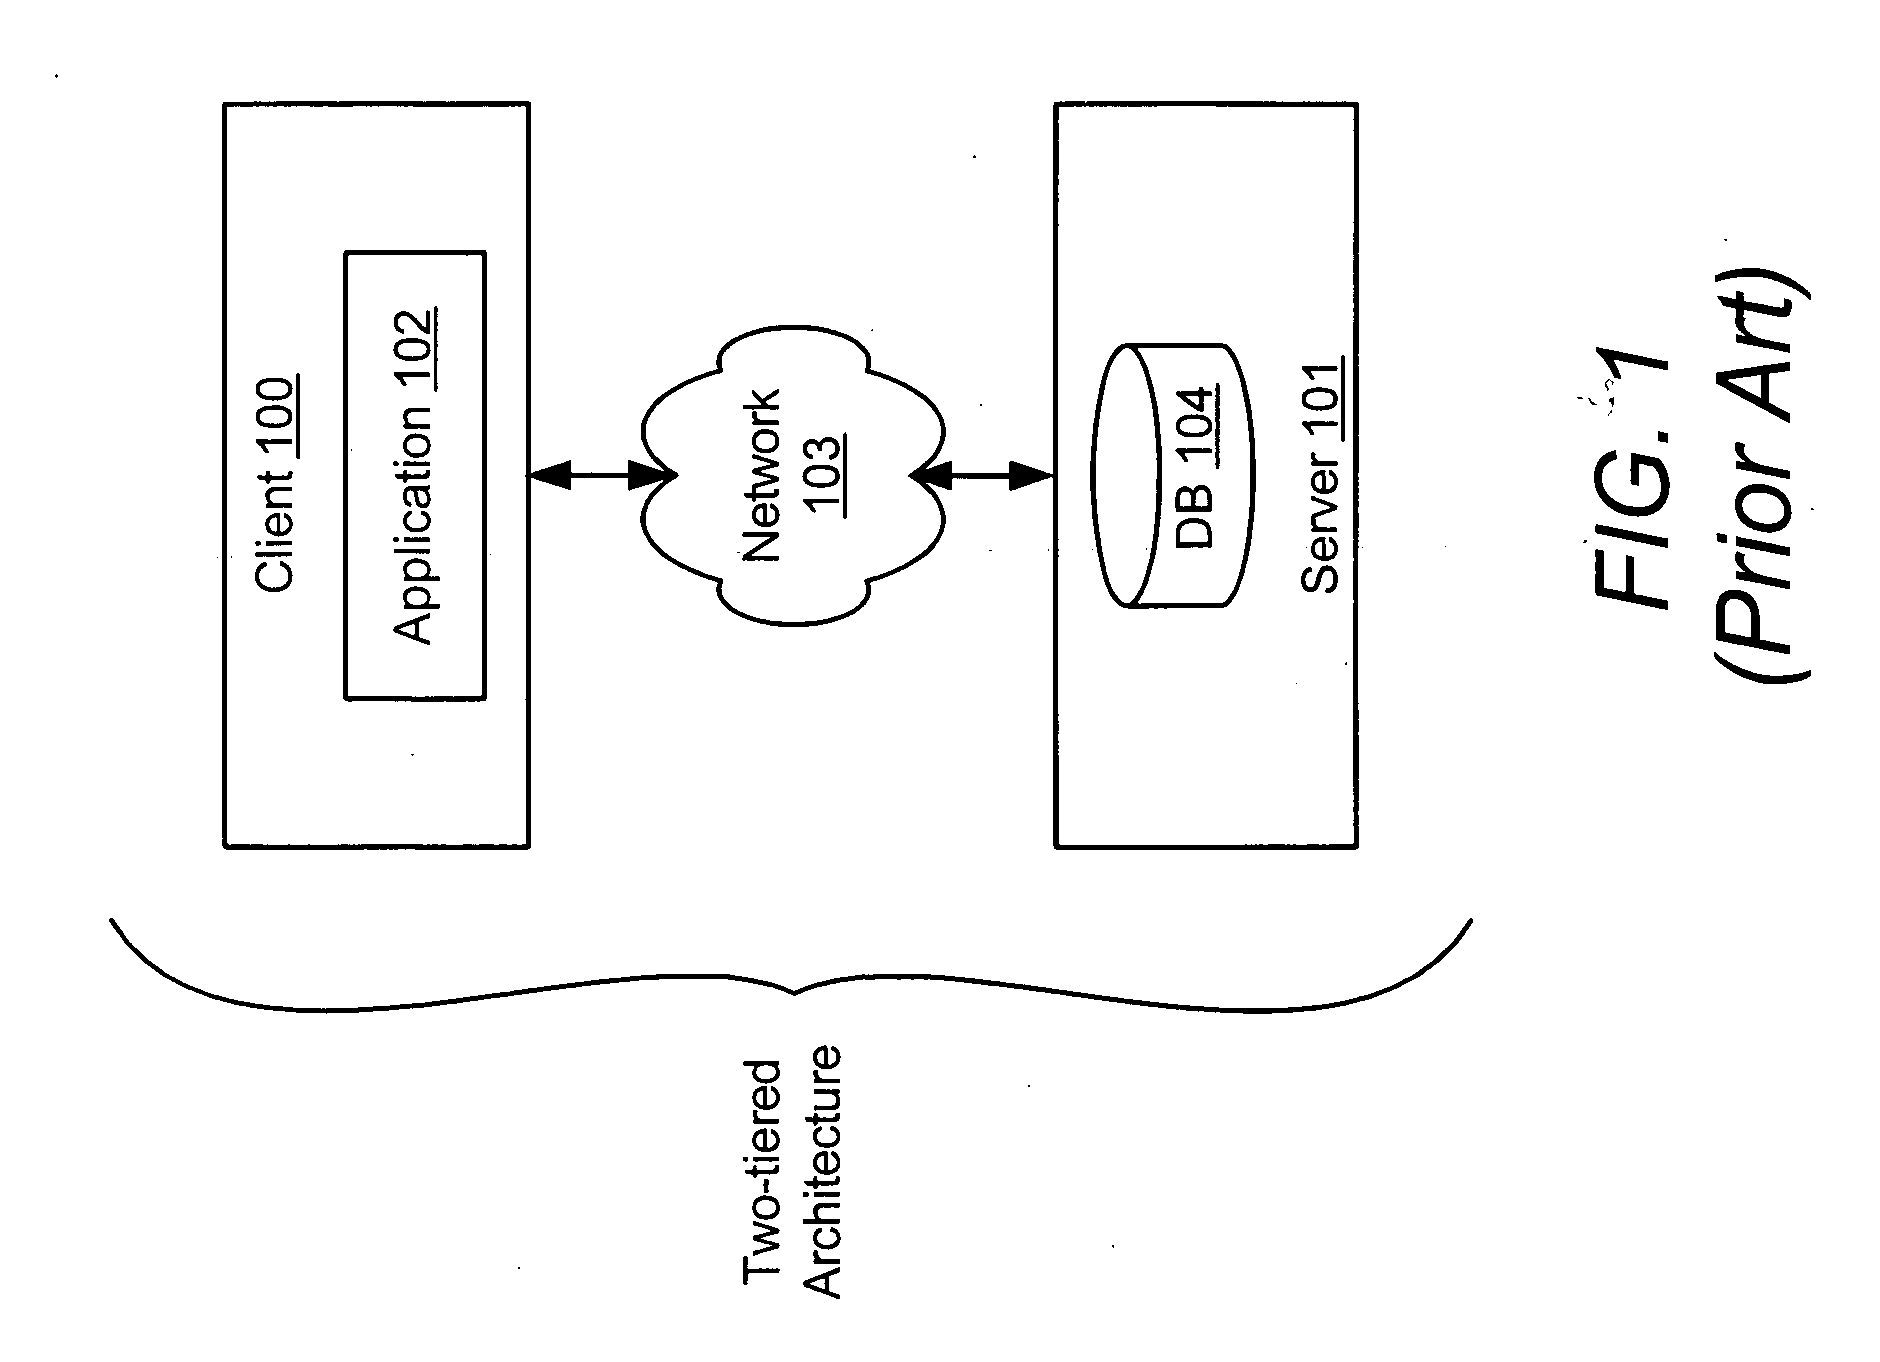 Message-oriented middleware provider having multiple server instances integrated into a clustered application server infrastructure